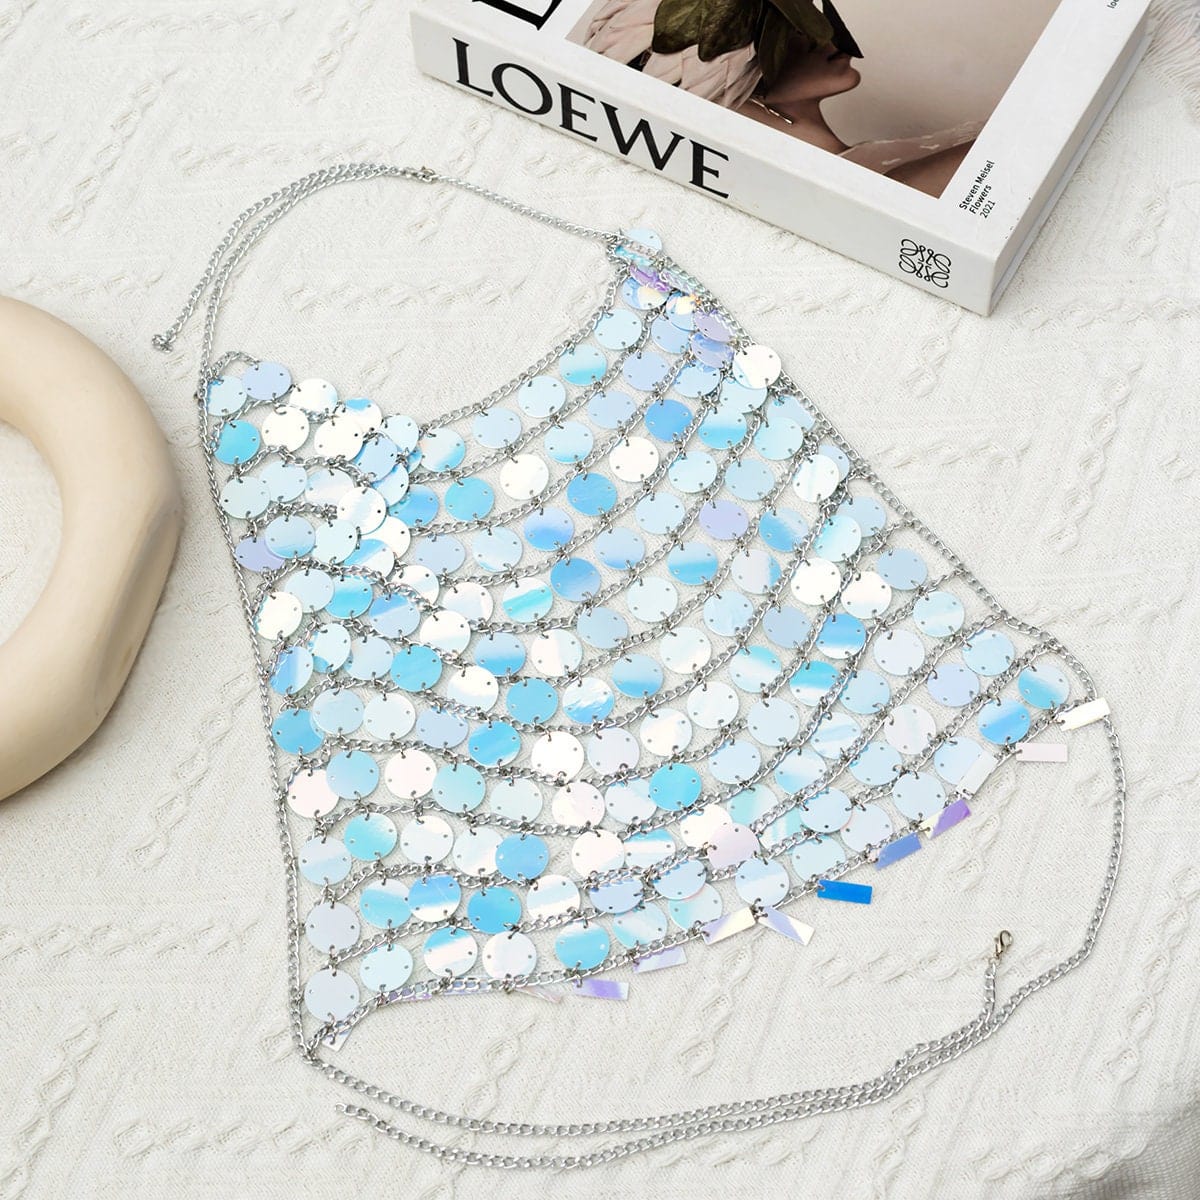 Handmade Backless Colorful Sequins Body Chain Bra